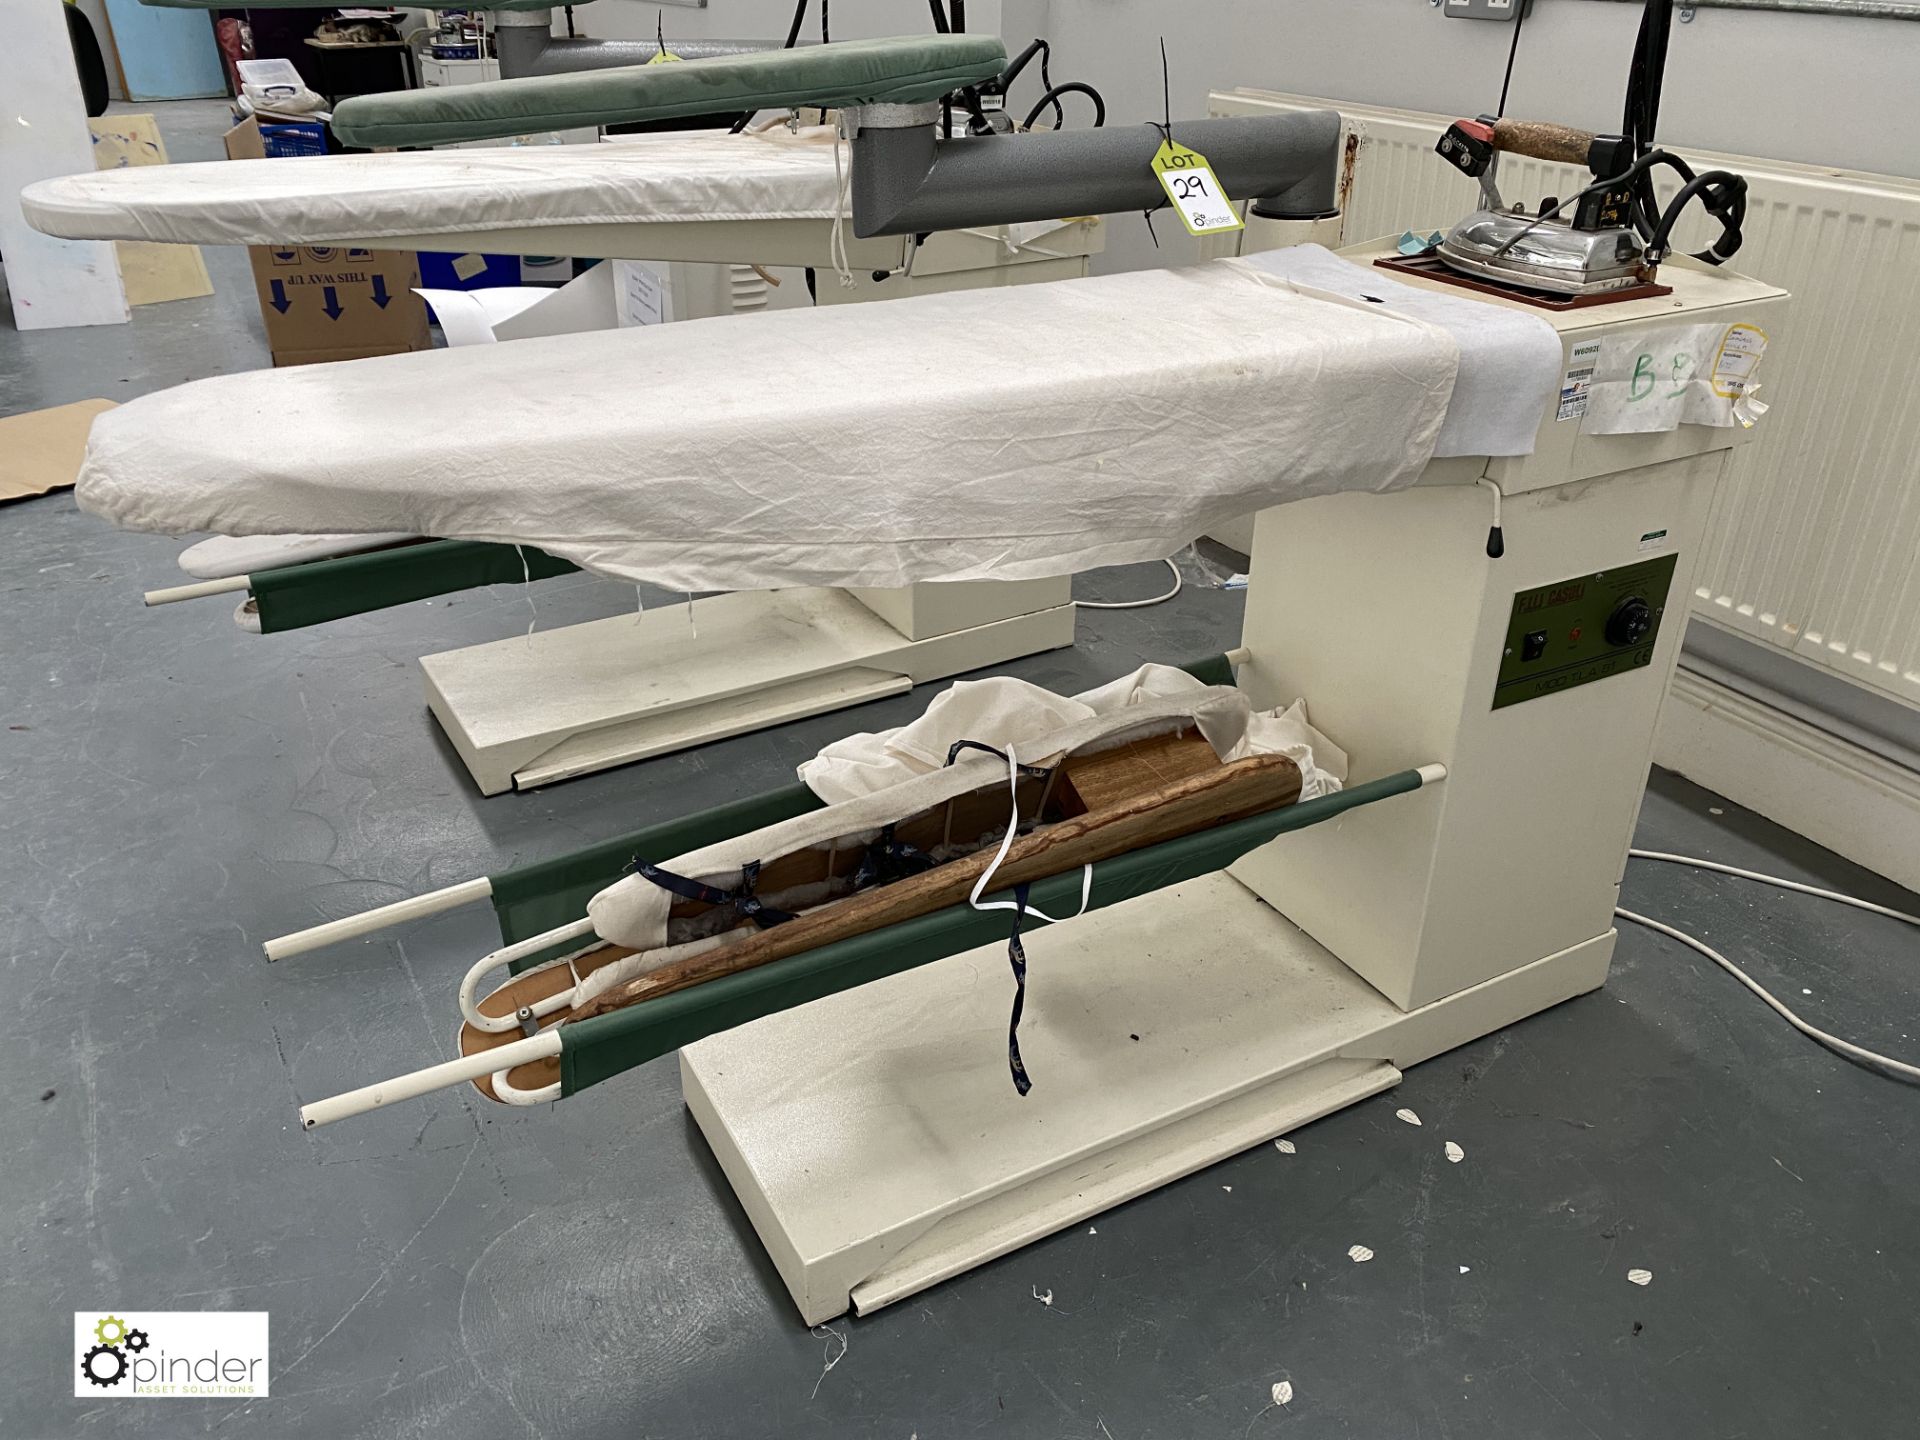 Casoli TLA81 Steam Ironing Table, serial number 25758 (location: Level 1, Joinery Workrooms)